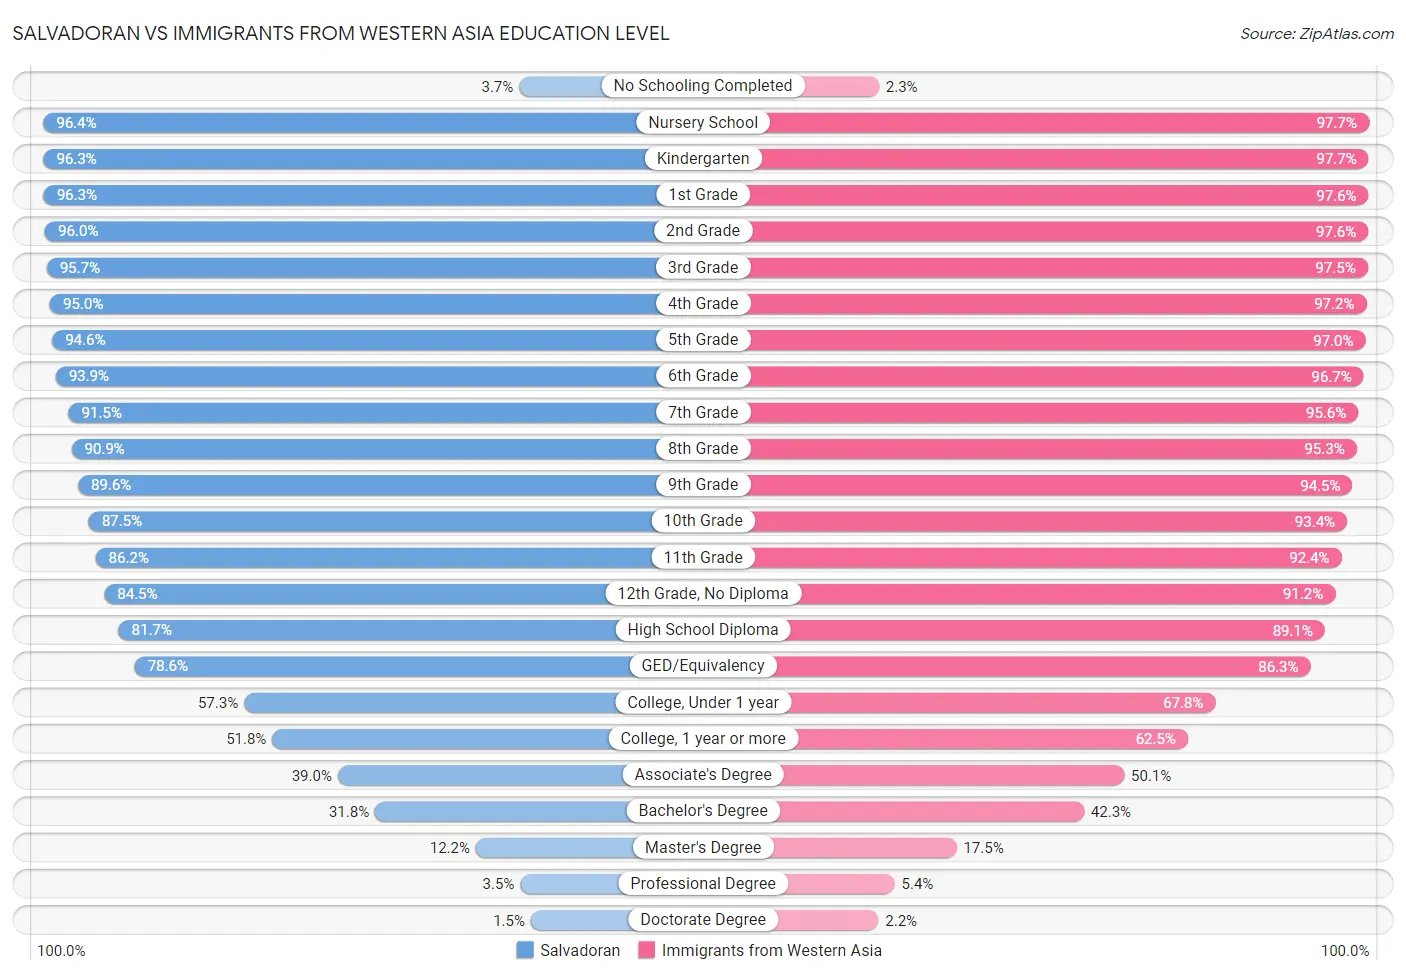 Salvadoran vs Immigrants from Western Asia Education Level